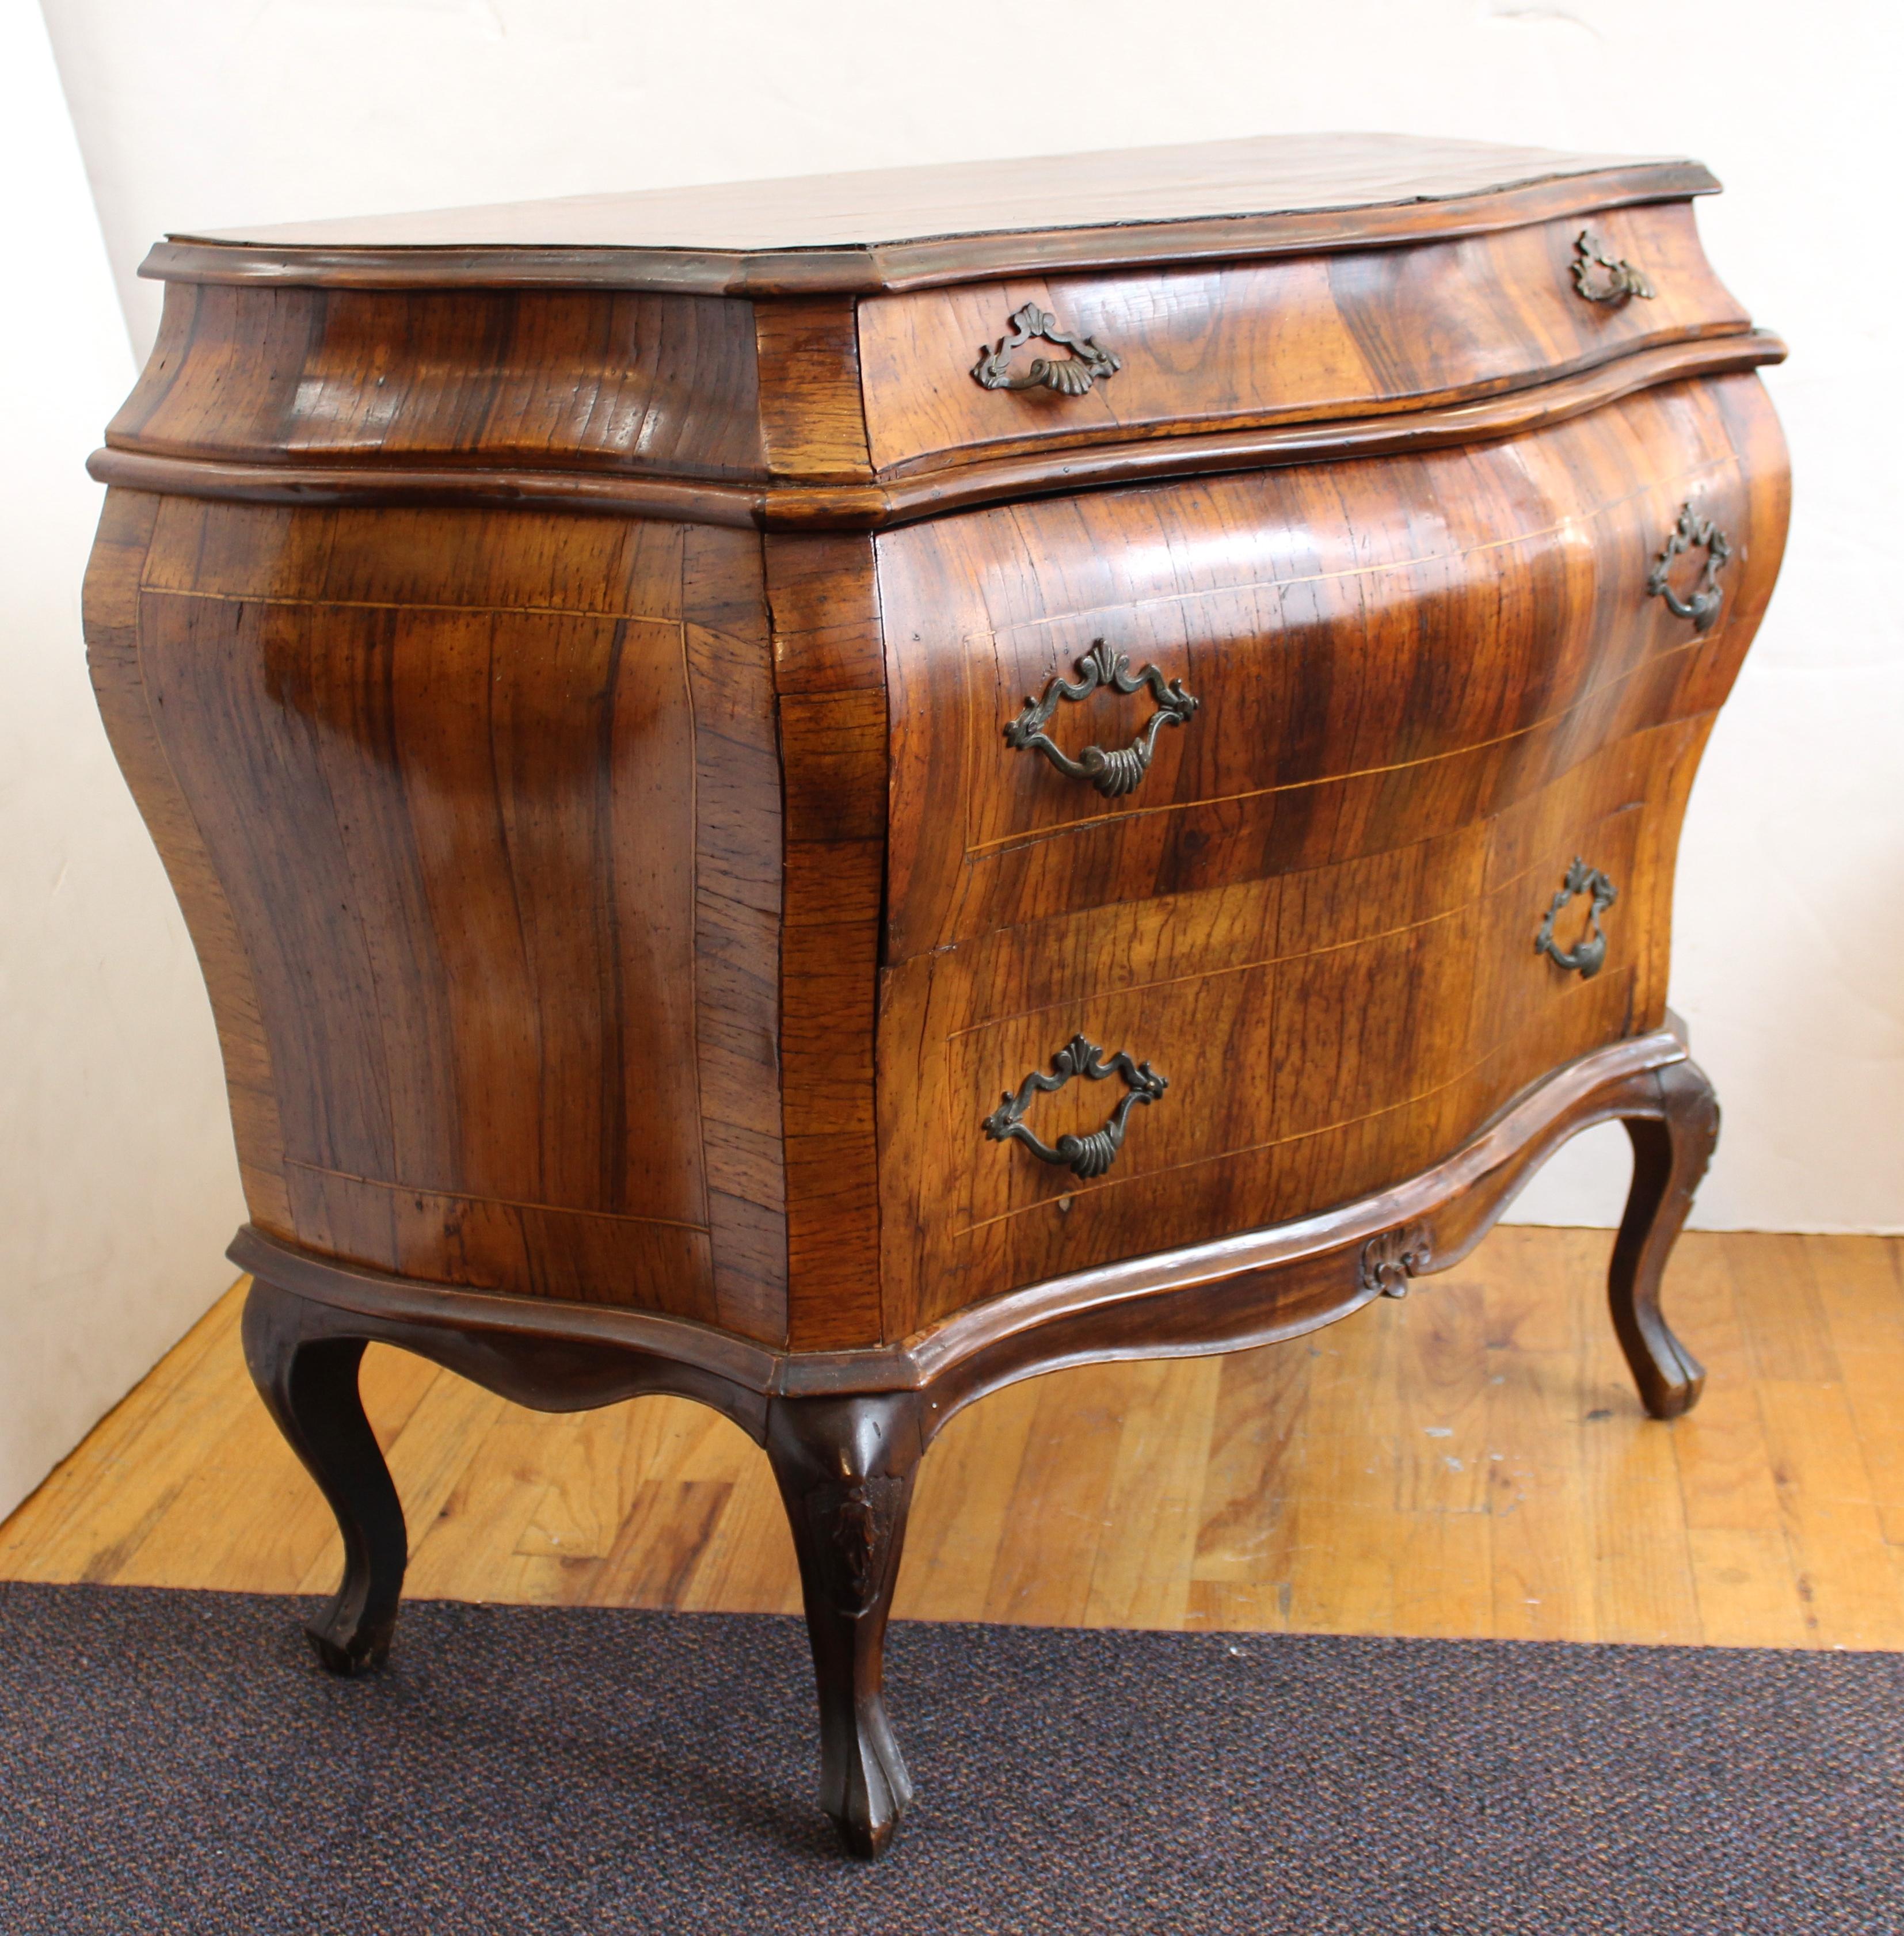 Northern Italian Rococo manner bombe commode in fruit-wood inlay, with two small drawers over two rows of long drawers and cabriole legs. The piece is in good antique condition and was made in the early to mid-19th century. The piece shows some age